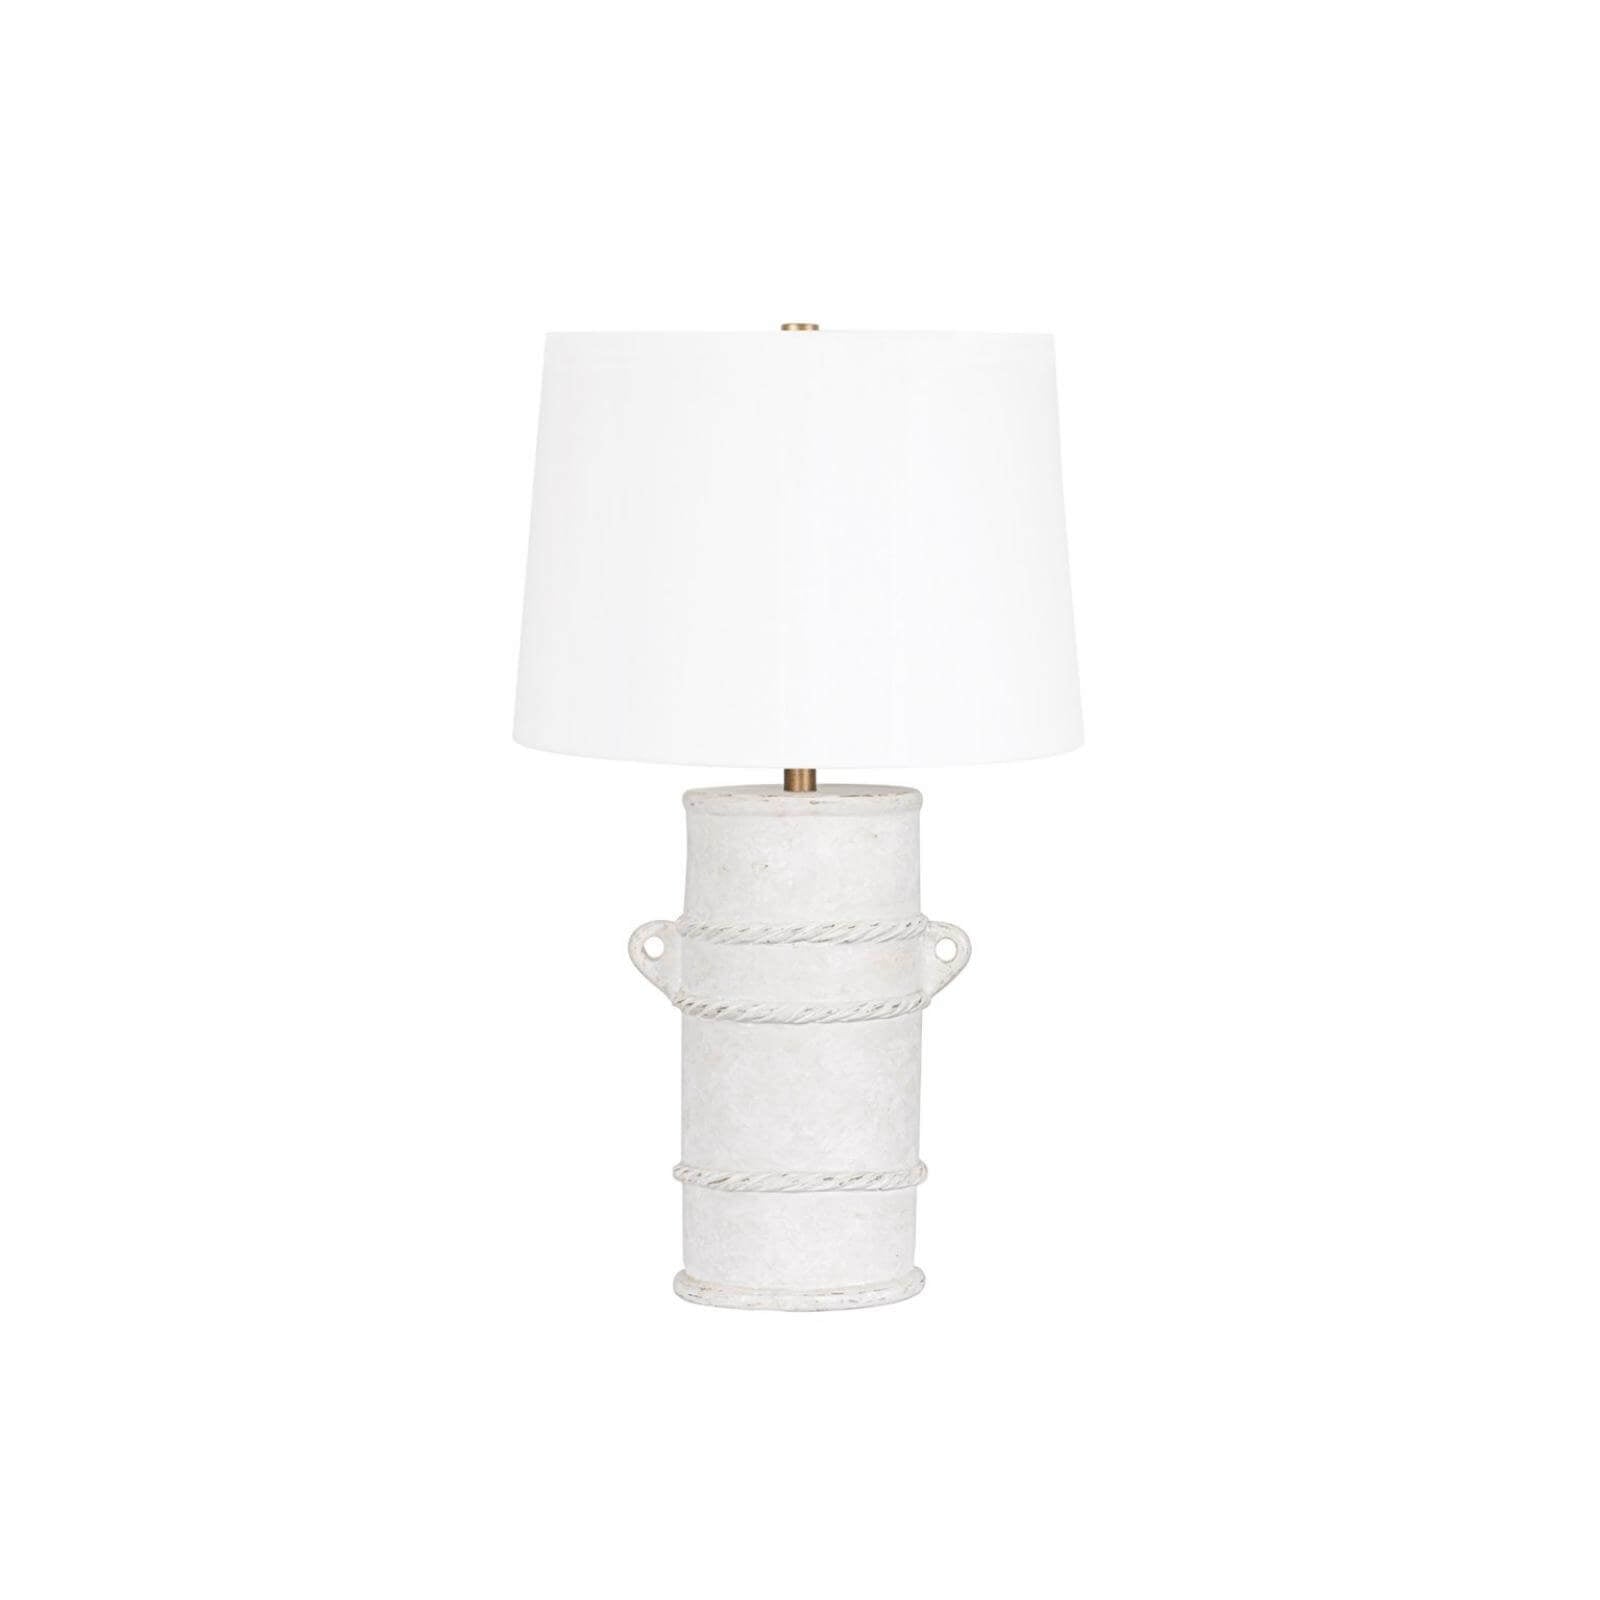 White terracotta table lamp with weathered finish